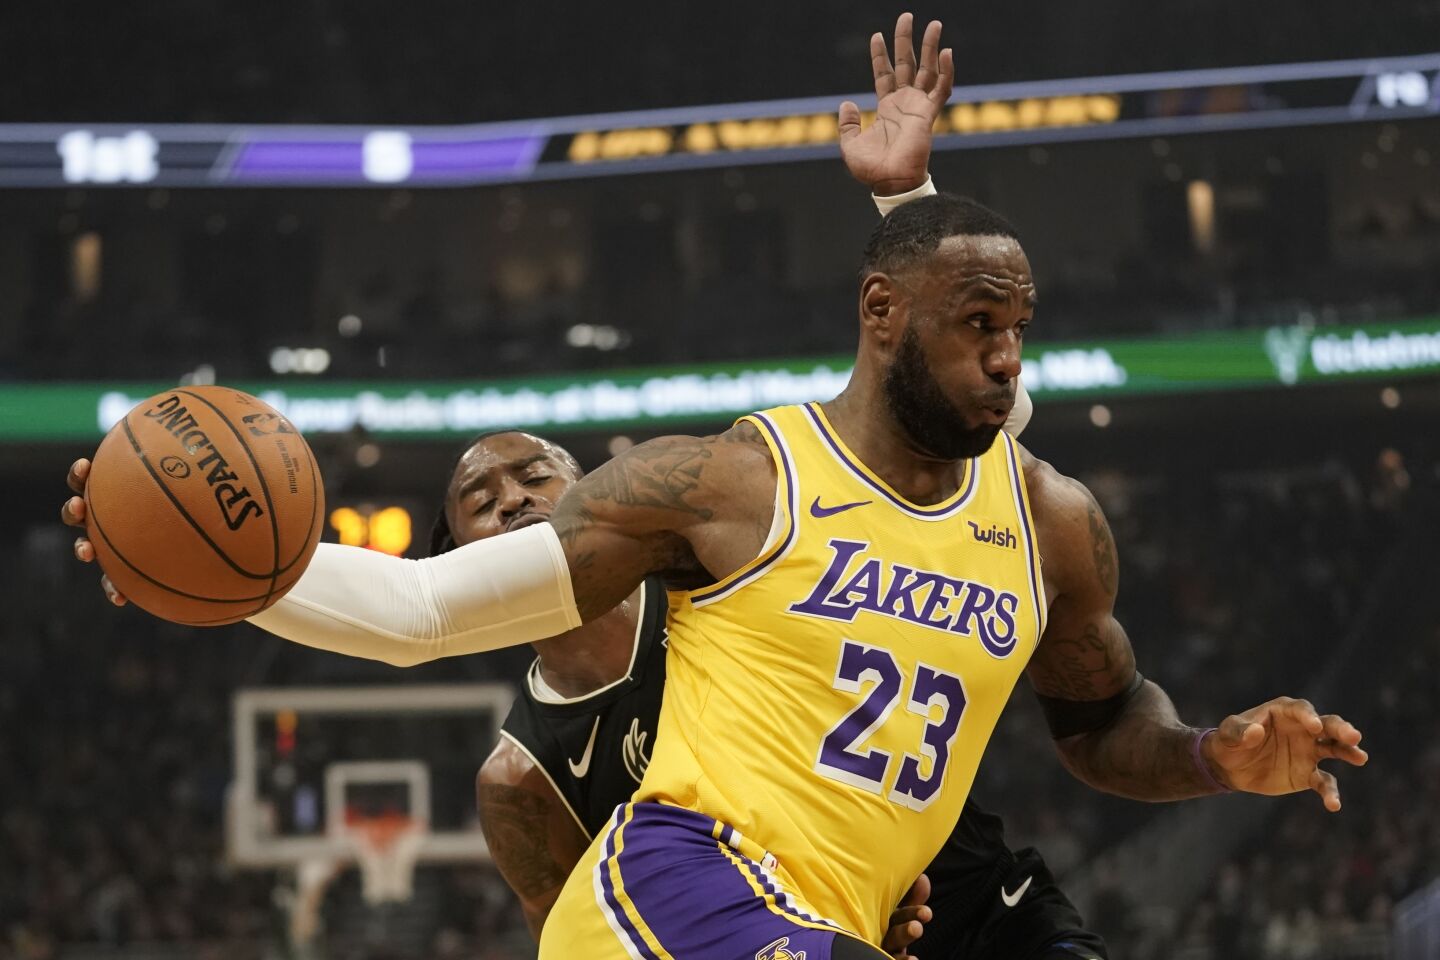 Lakers forward LeBron James drives past Bucks guard Wesley Matthews during the first half of a game Dec. 19.